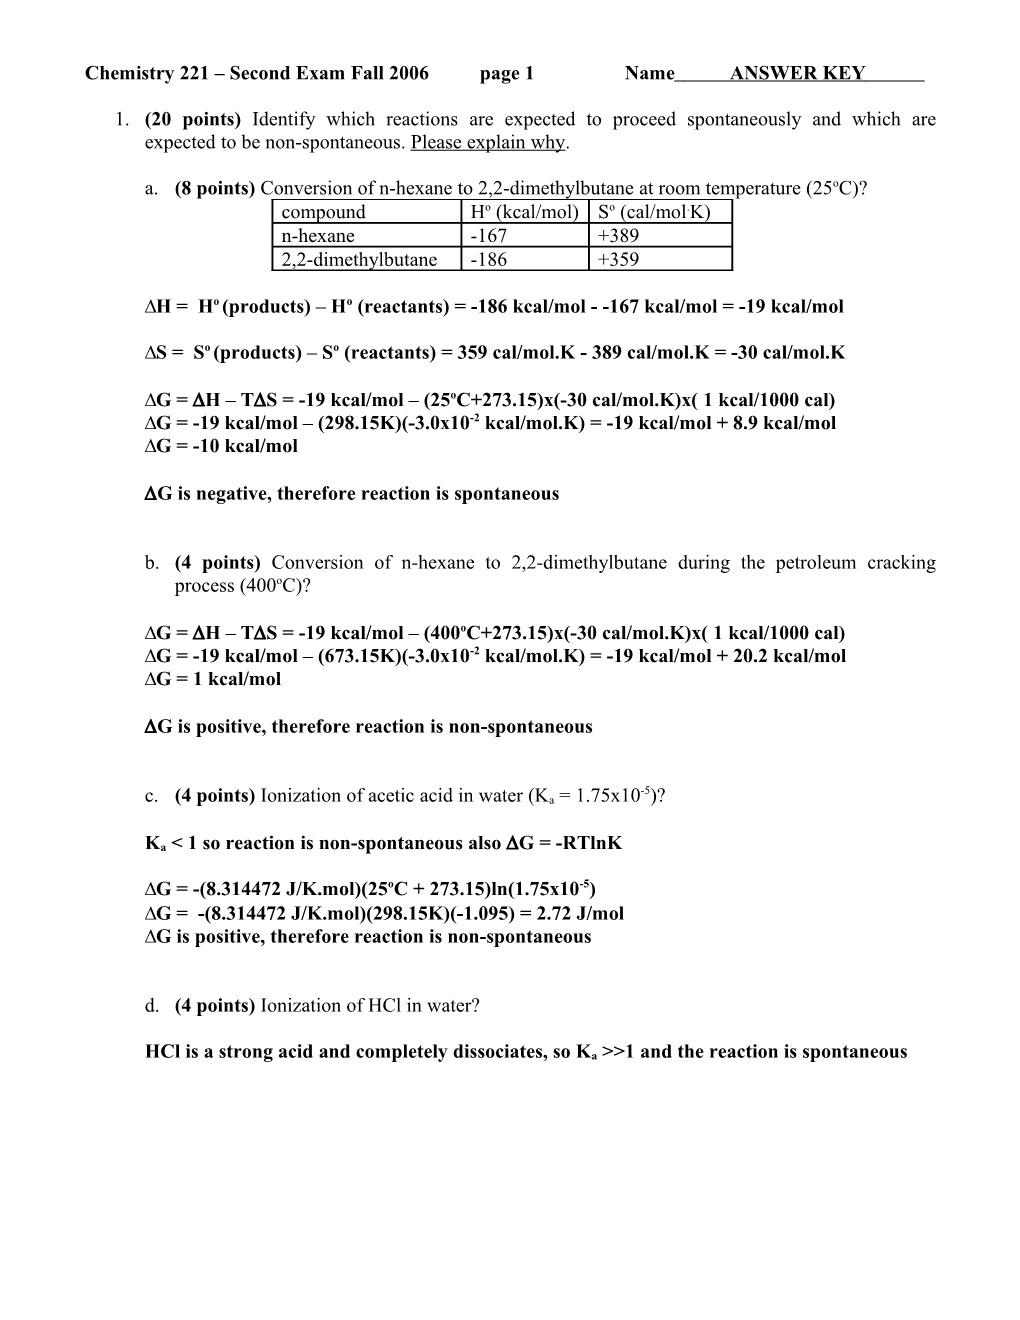 Chemistry 221 Second Exam Fall 2006 Page 7 Name ANSWER KEY